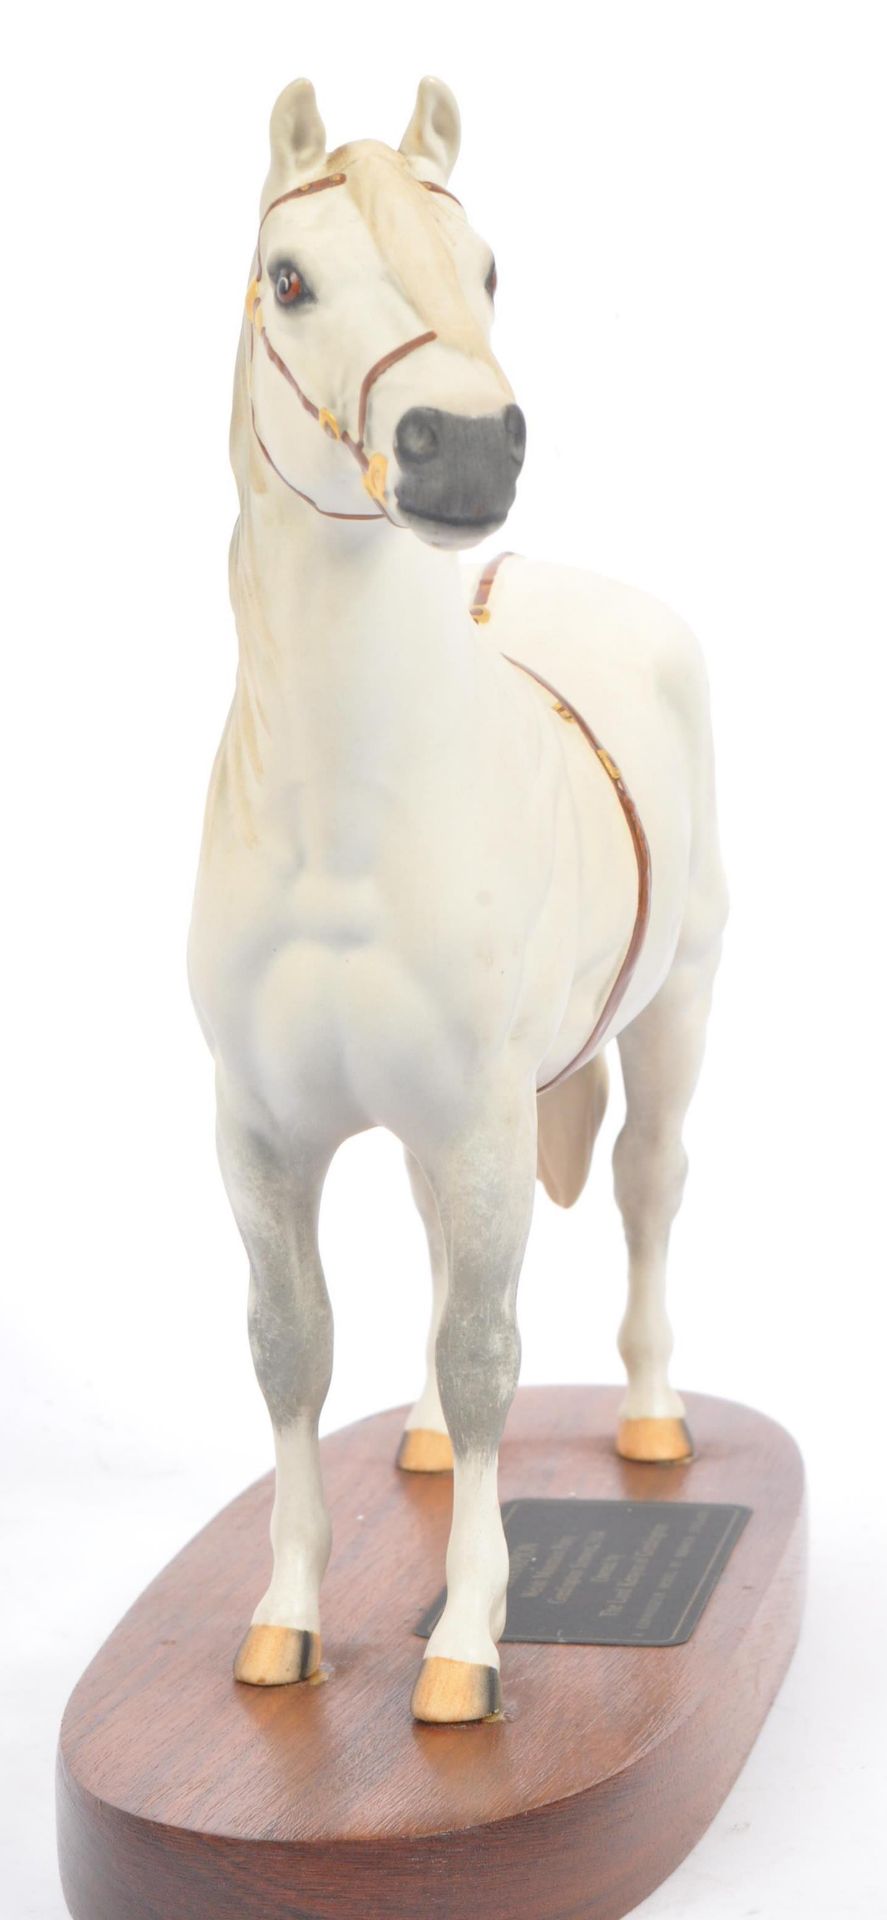 BESWICK - PORCELAIN CHINA FIGURINE OF A HORSE TITLED CHAMPION - Image 2 of 6